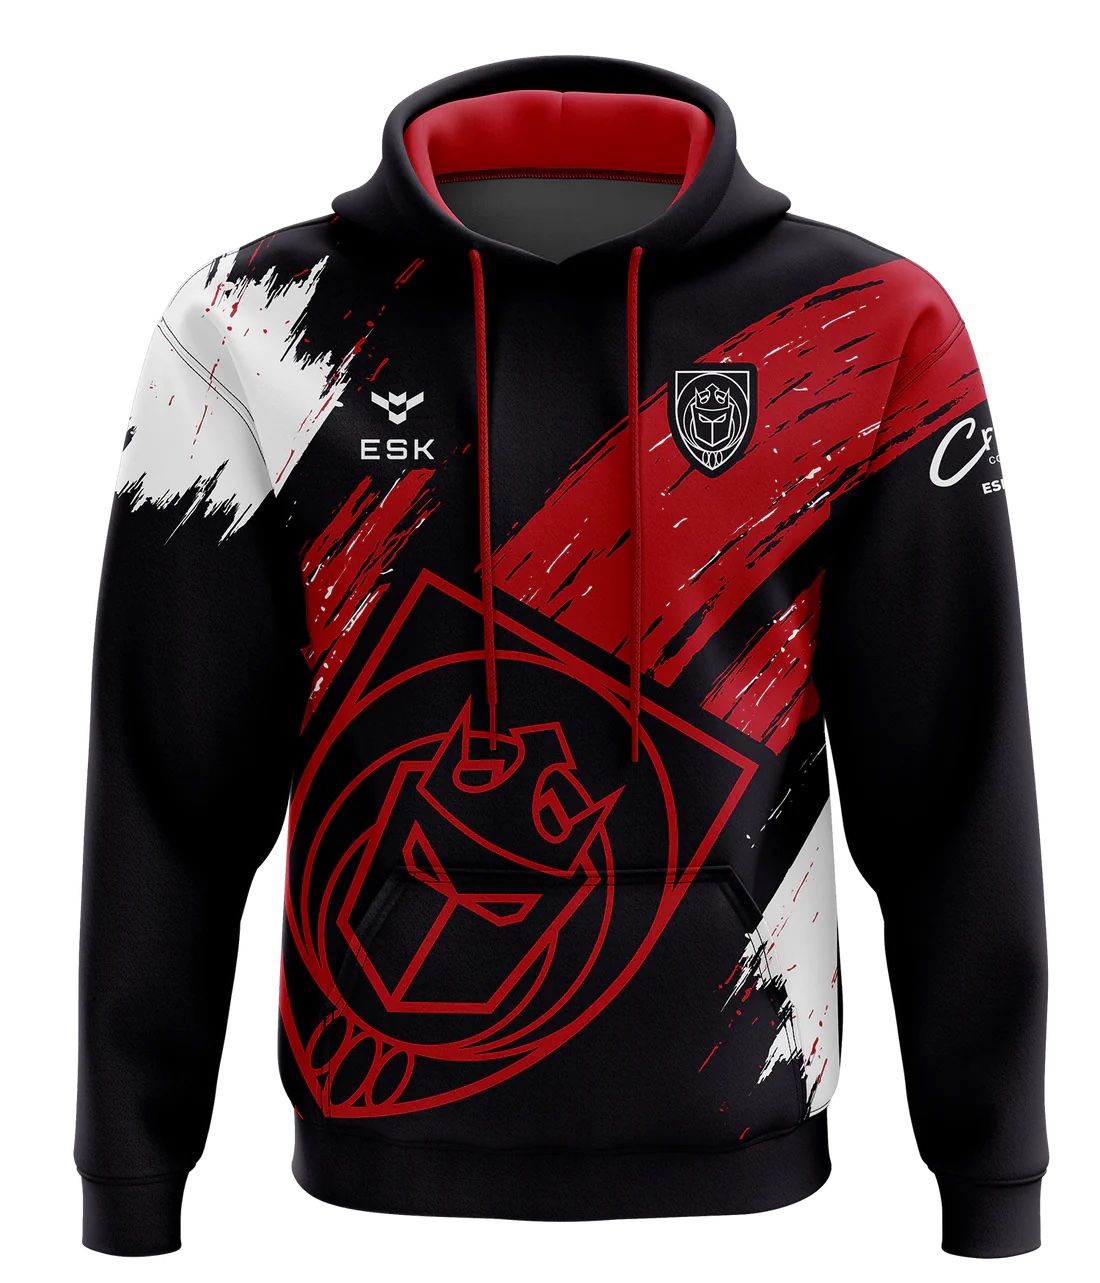 1 f78e81ef c824 4560 9734 f9357bd15add 1100x copy - Craven College Crusaders Esports Hoodie - with Gamertag